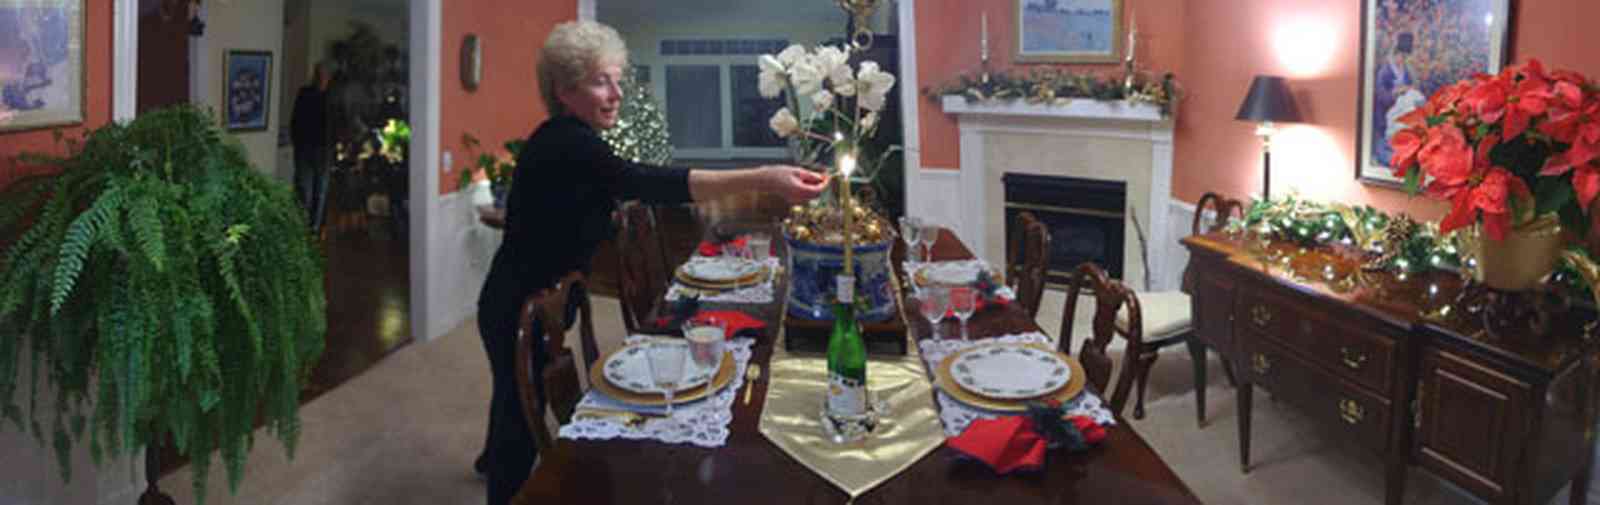 Pace:-Floridatown_08.jpg:  dining room, gloria taylor, candles, poinsetta, fireplace